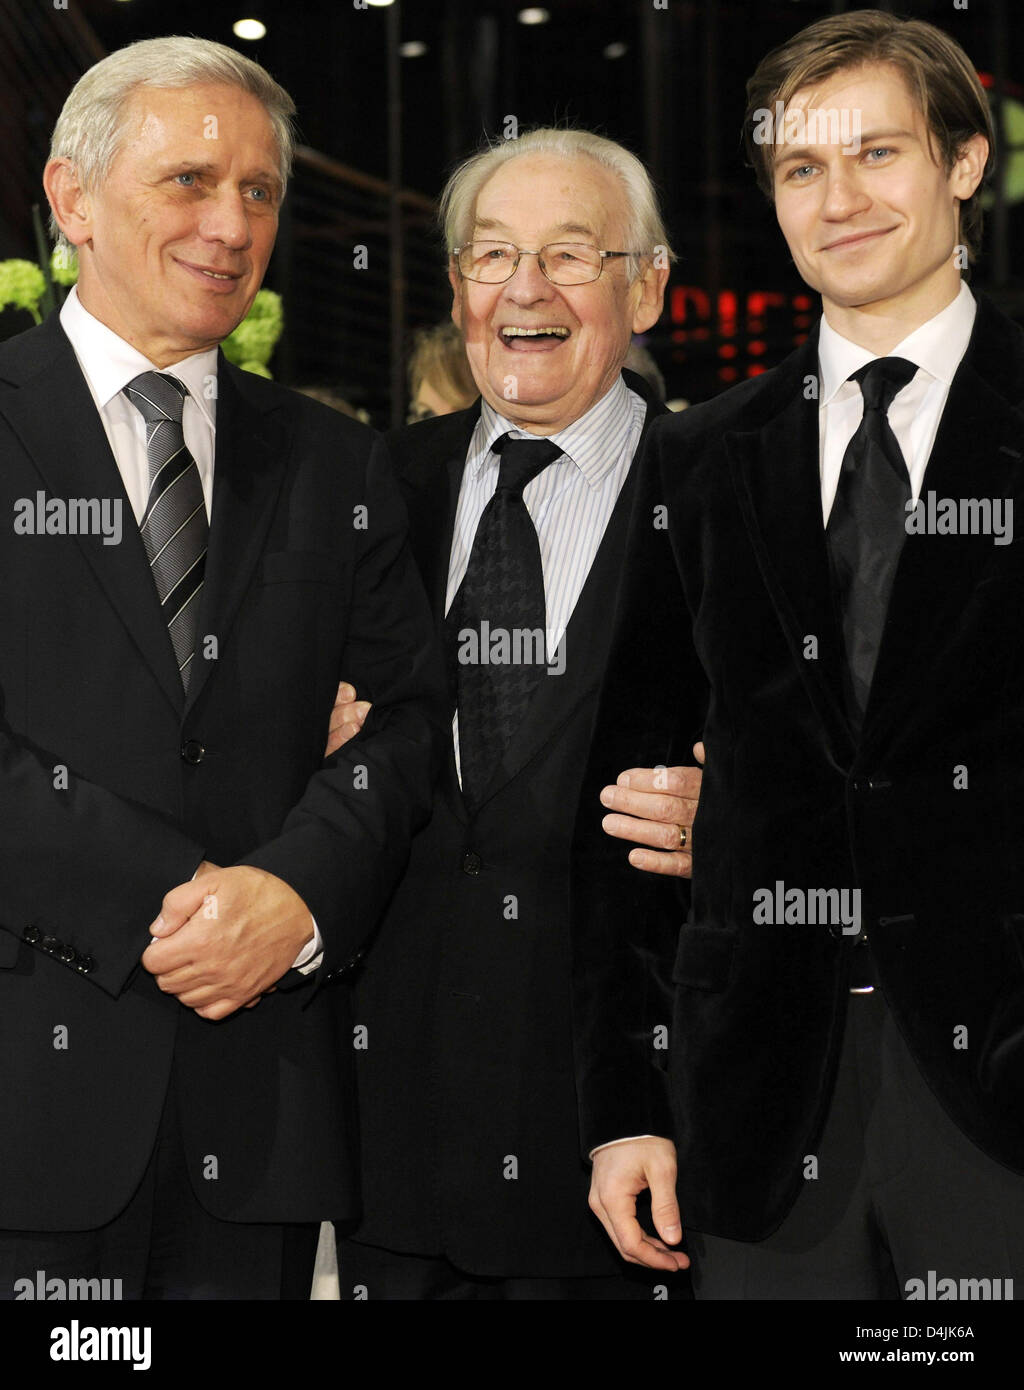 Polish director Andrzej Wajda (C) and Polish actors Jan Englert (L) and Pawel Szajda arrive for the premiere of the film ?Sweet Rush? at the 59th Berlin International Film Festival in Berlin, Germany, 13 February 2009. A total of 18 films compete for the Silver and Golden Bears of the 59th Berlinale. The winners will be announced on 14 February 2009. Photo: Tim Brakemeier Stock Photo